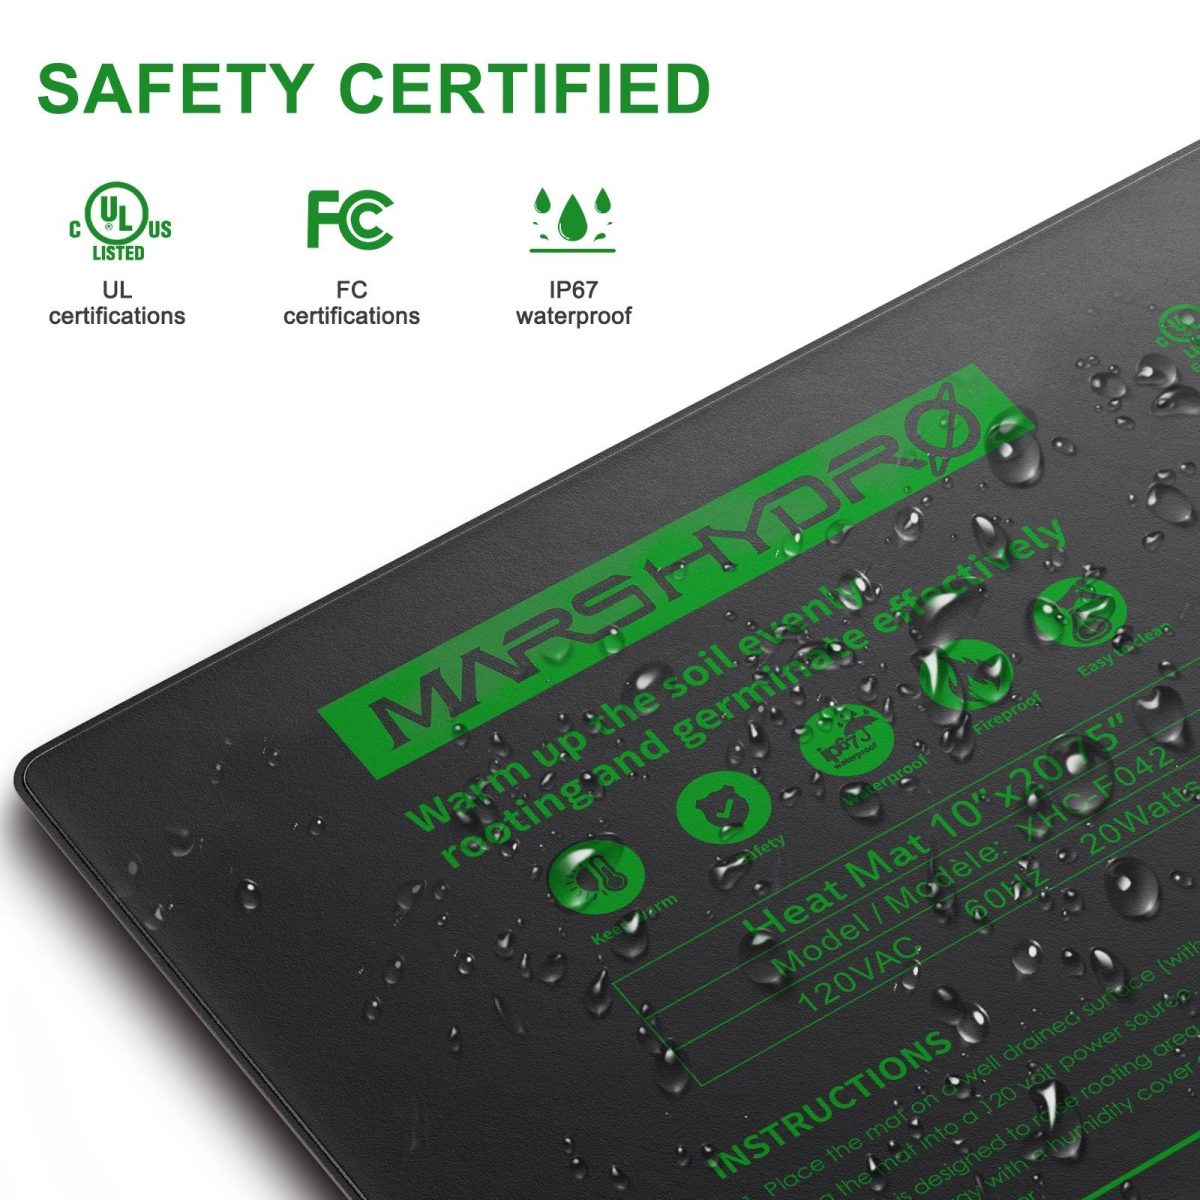 The mars hydro seedling heat mats have UL and FC certifications, safety certified.